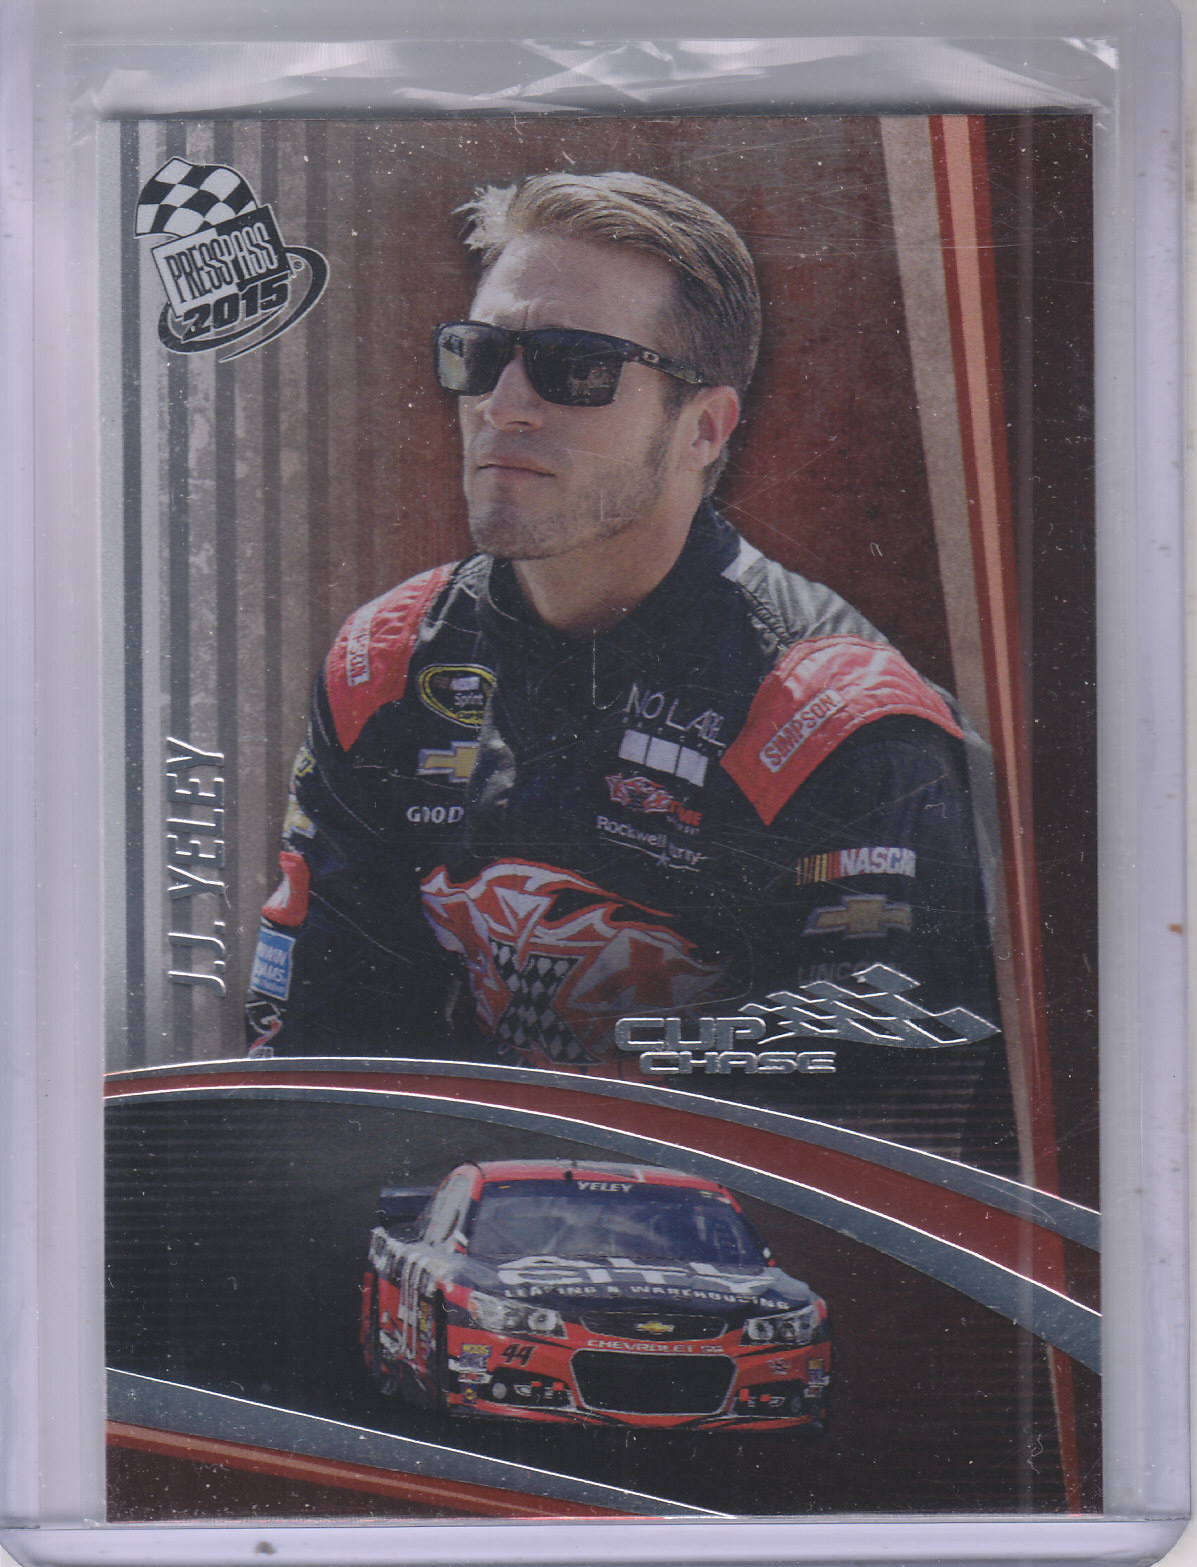 2015 Press Pass Cup Chase #39 J.J. Yeley